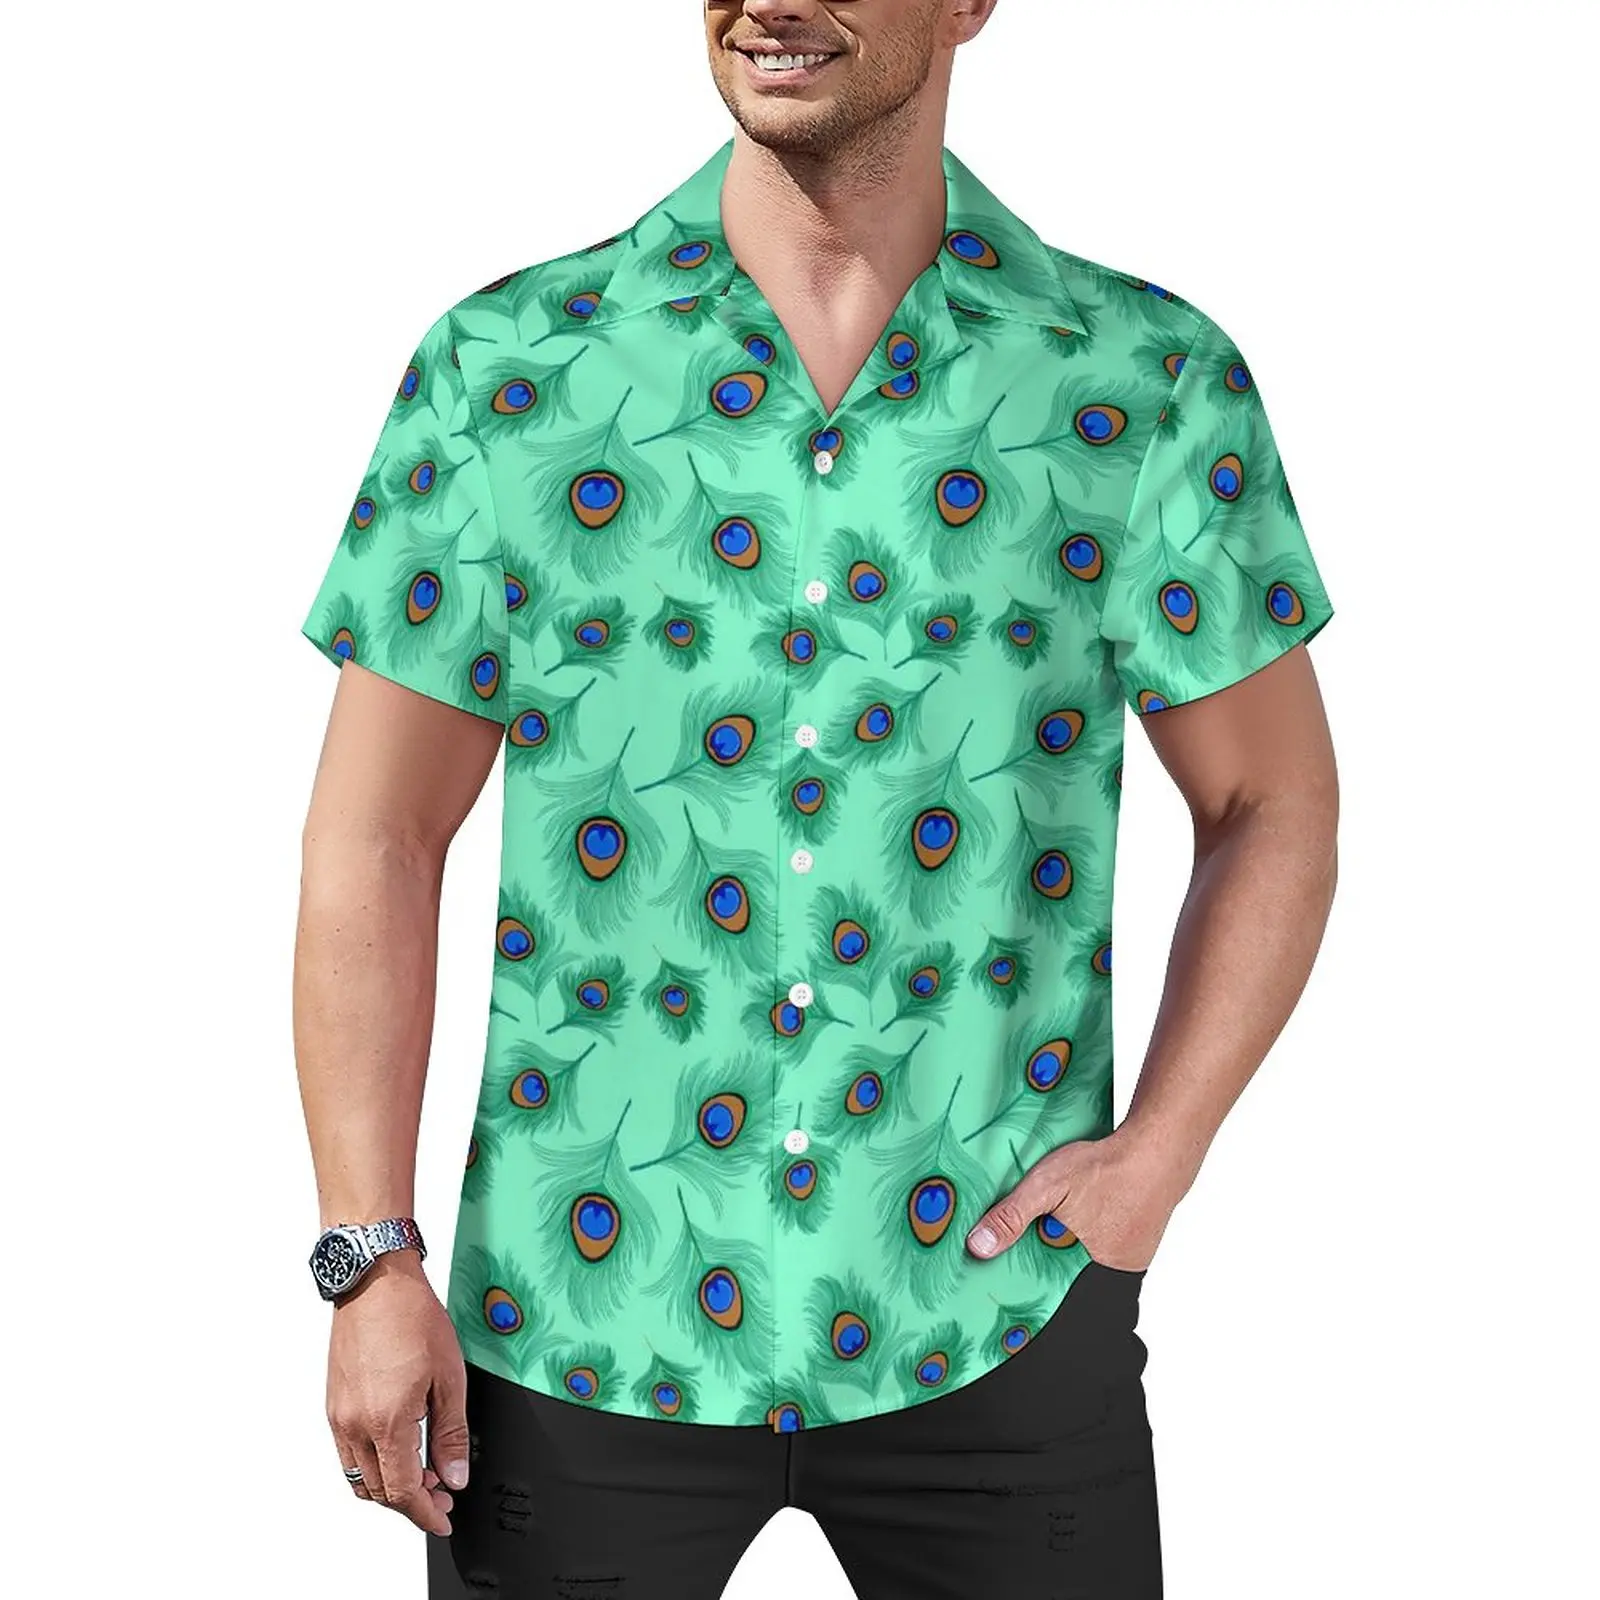 

Peacock Feathers Blouses Male Light Aqua Casual Shirts Hawaii Short-Sleeve Design Y2K Oversized Vacation Shirt Birthday Gift